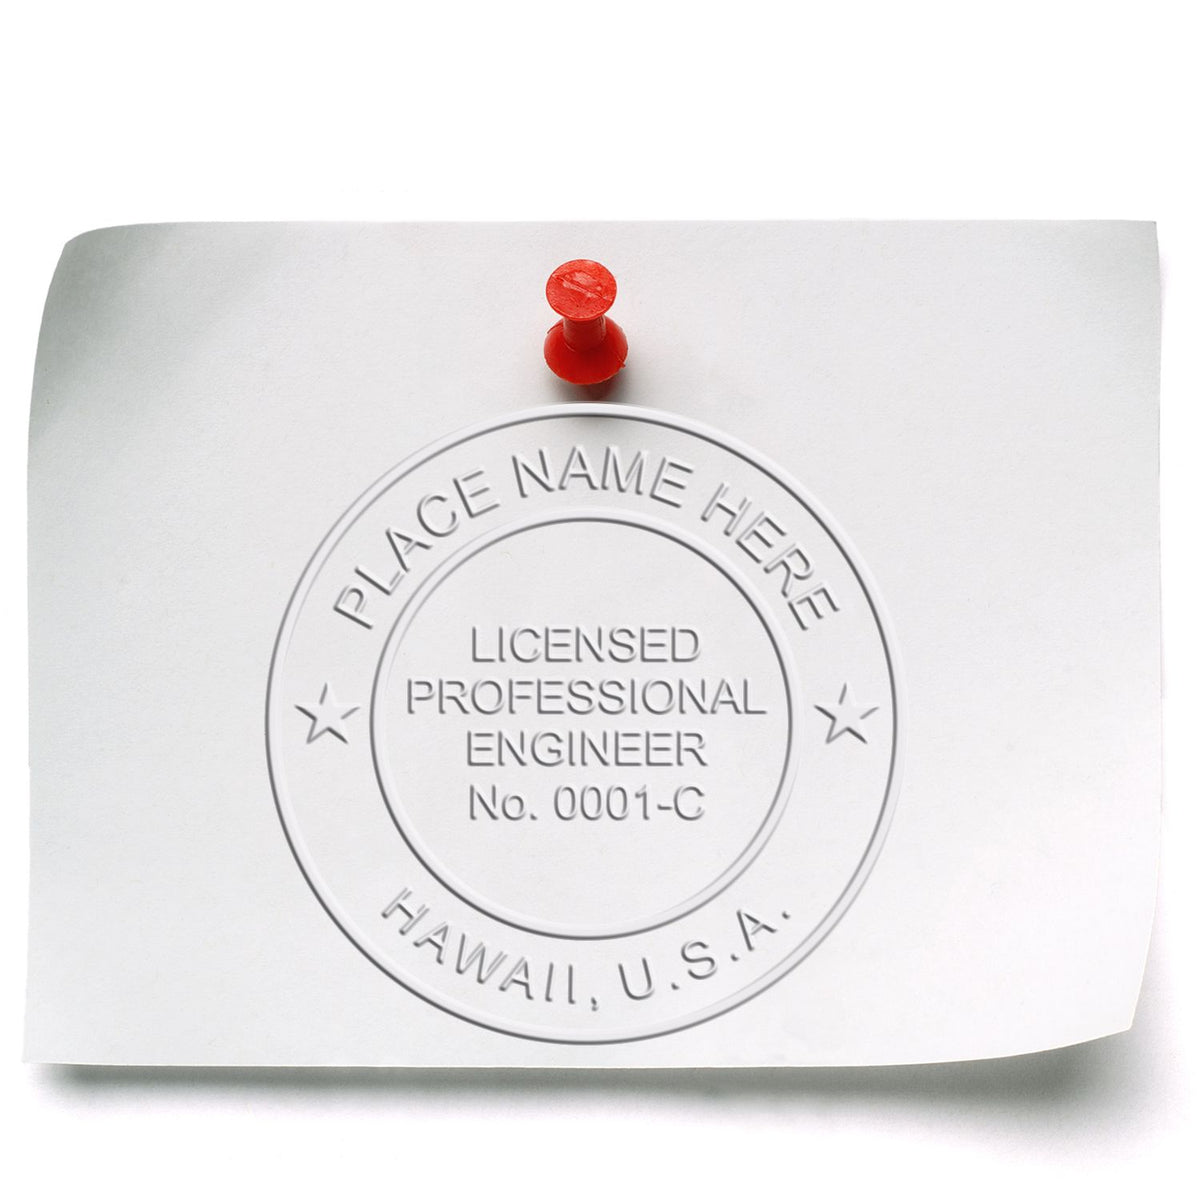 This paper is stamped with a sample imprint of the Hawaii Engineer Desk Seal, signifying its quality and reliability.